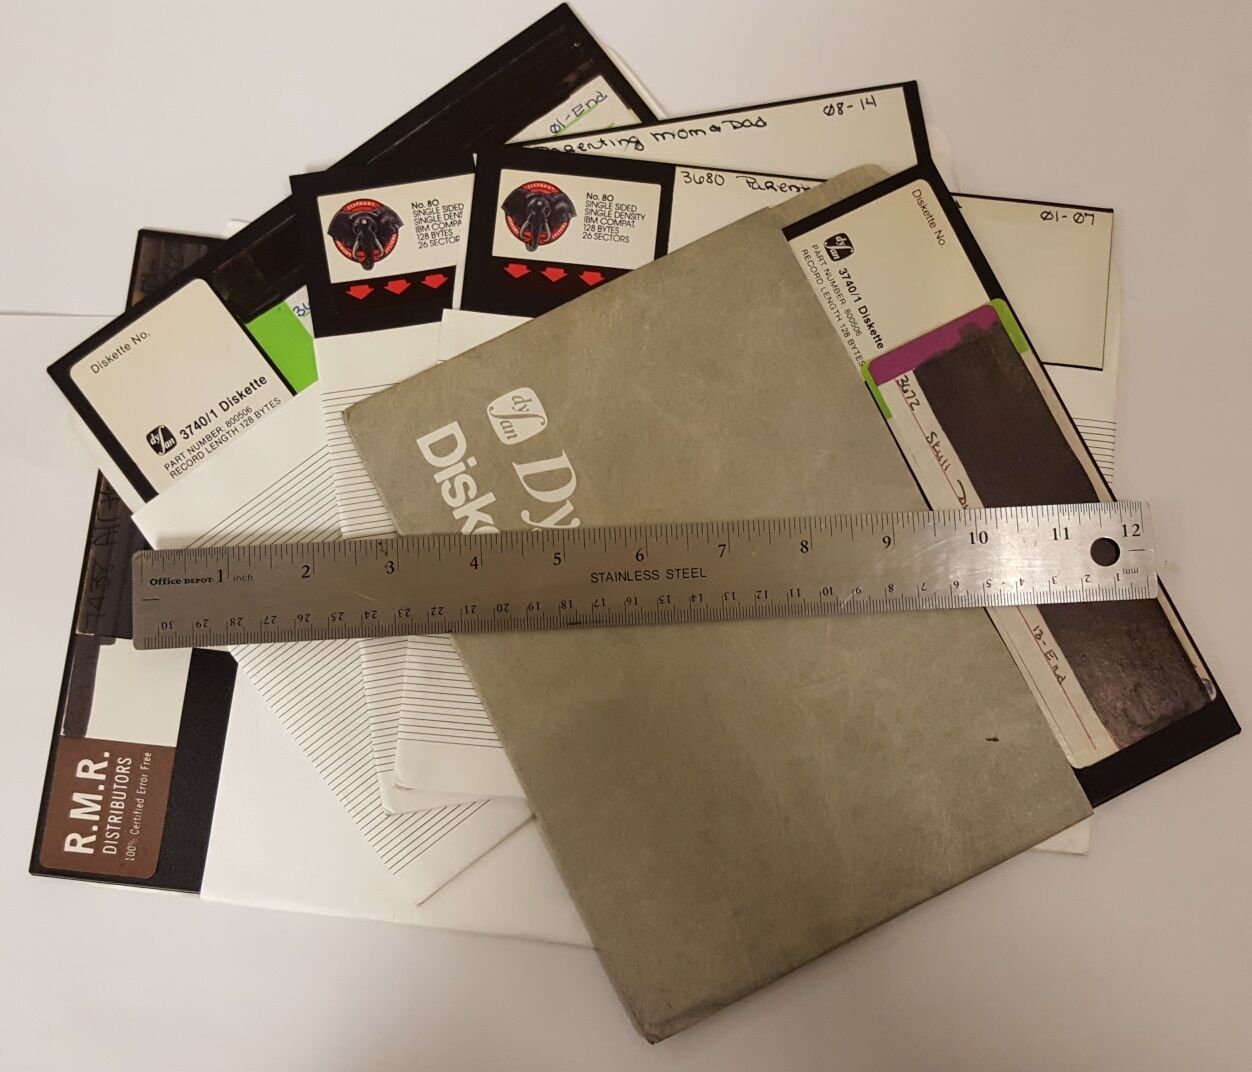 8 INCH FLOPPY DISKS (5 Pack)  PROMOTIONAL/NON-WORKING FLOPPY DISKETTES. 